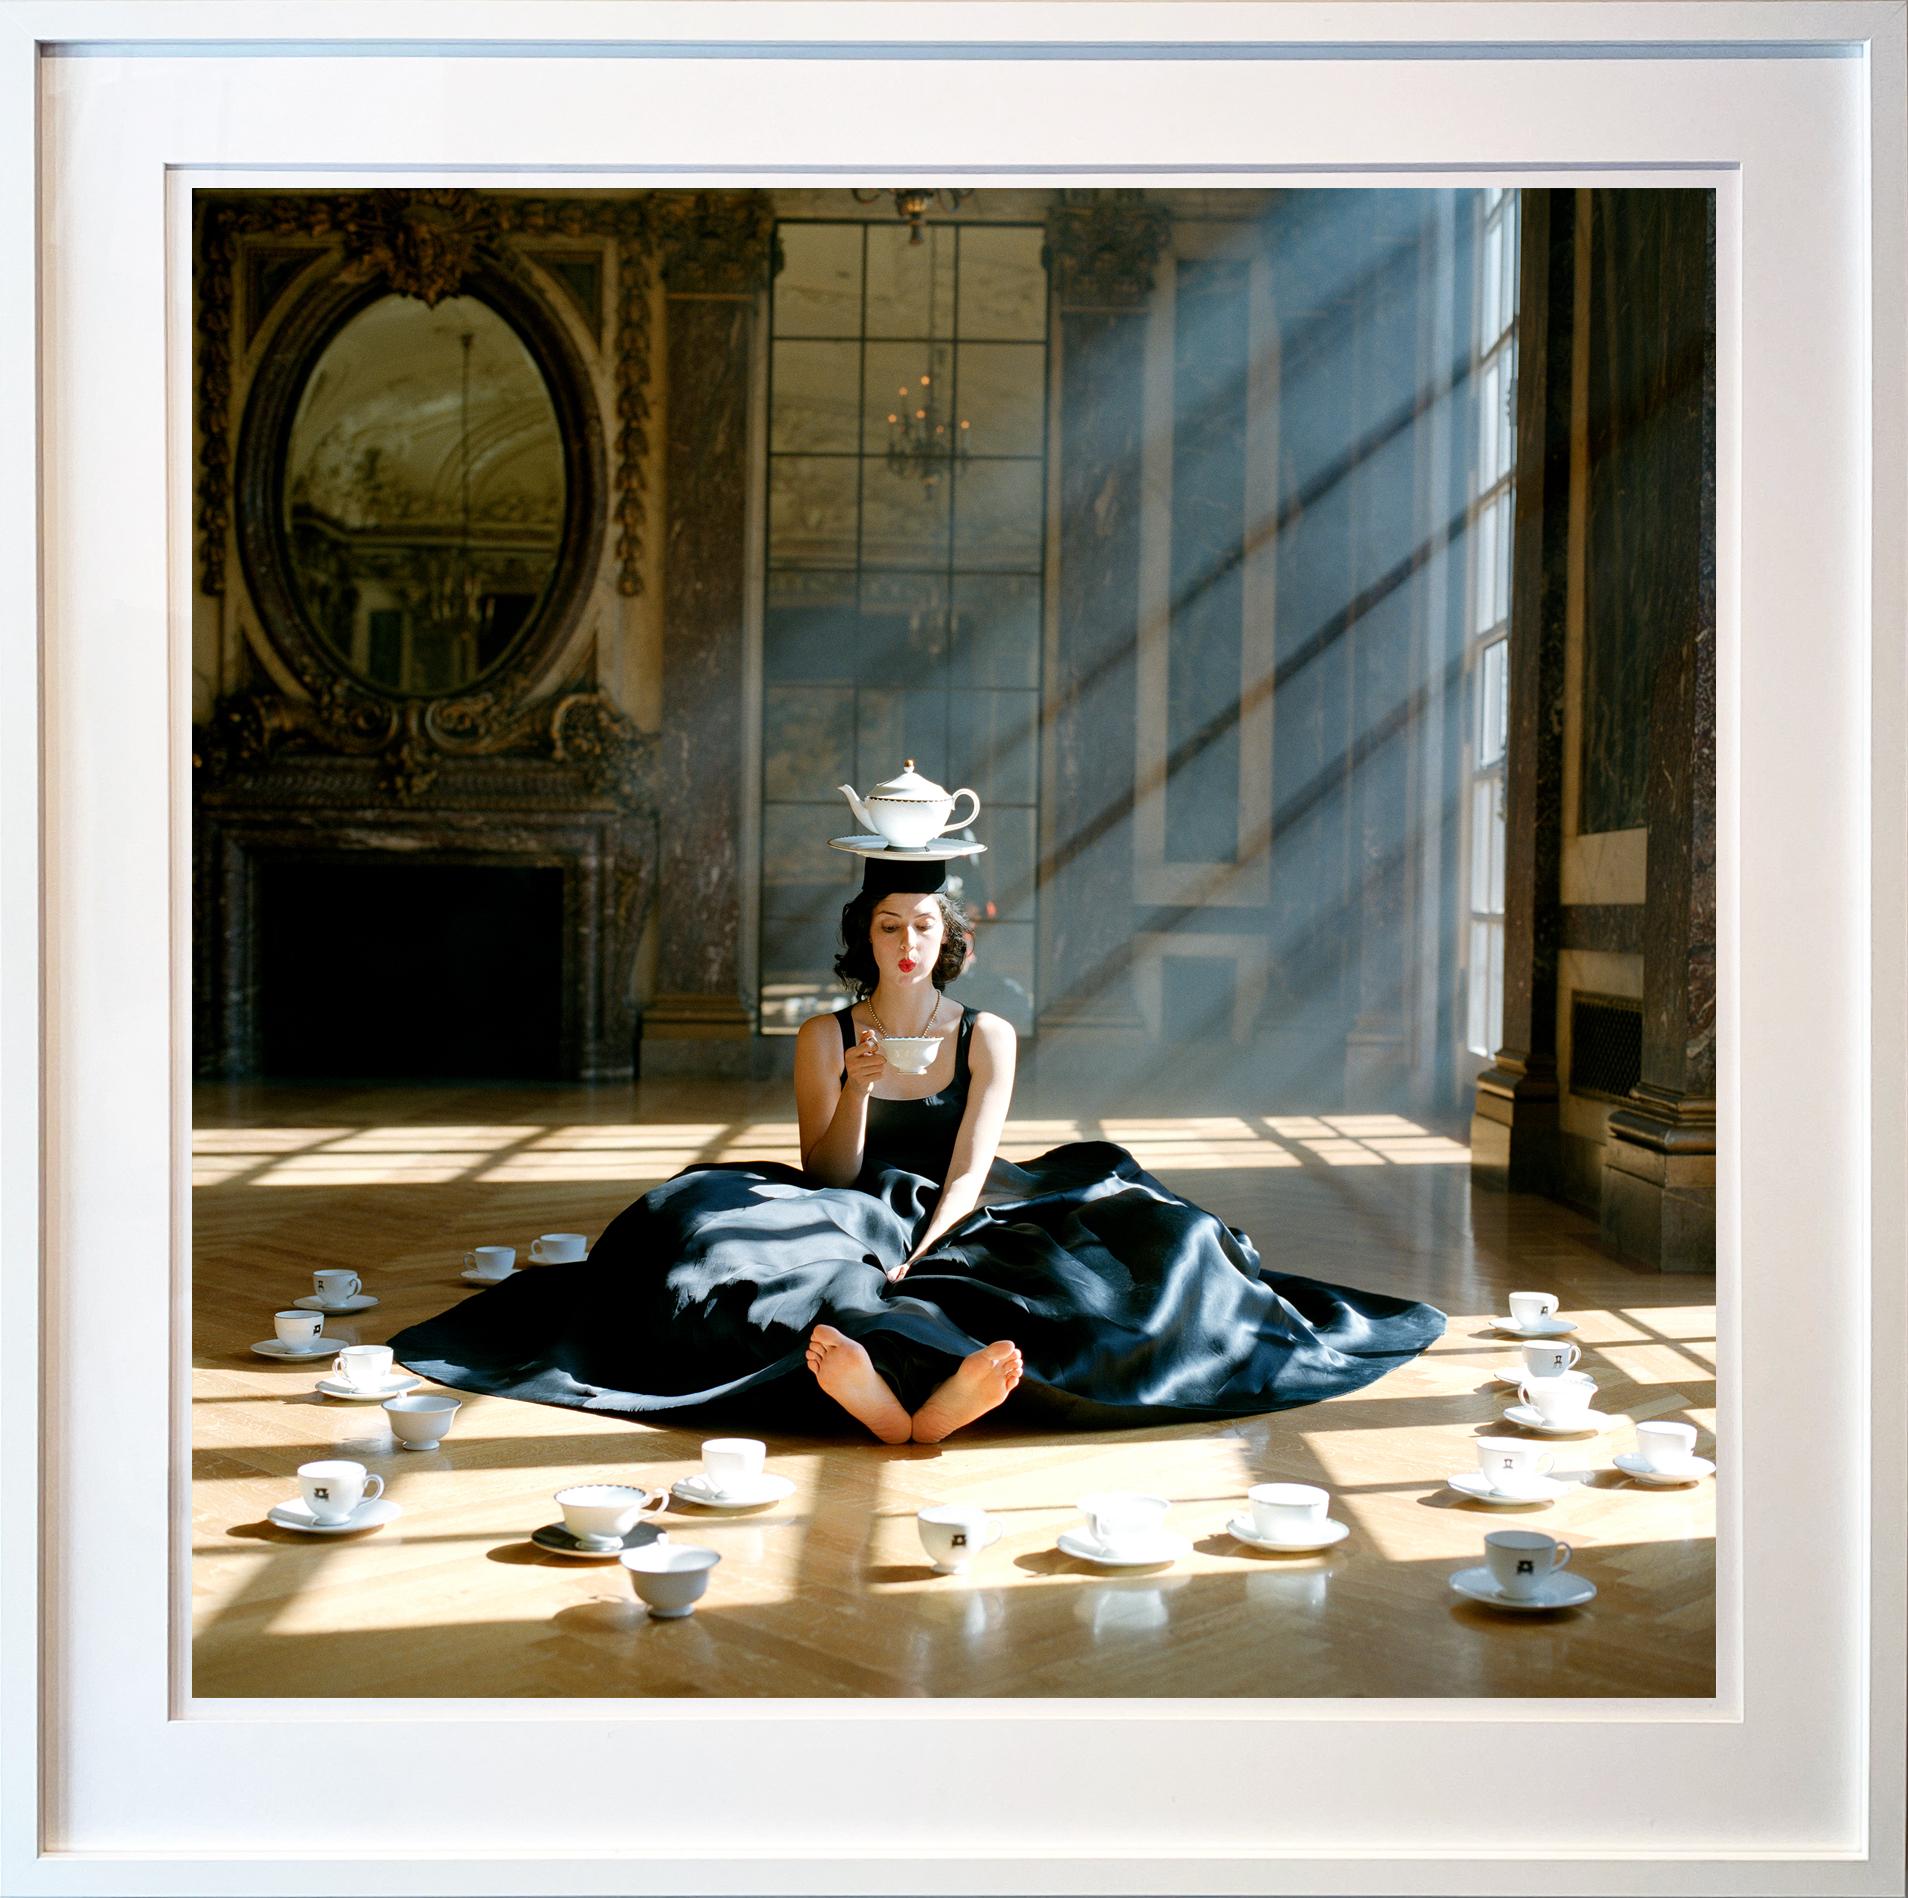 Zoe Balancing Teapot on Head, Burden Mansion, NY - 50 x 50 inches framed - Photograph by Rodney Smith